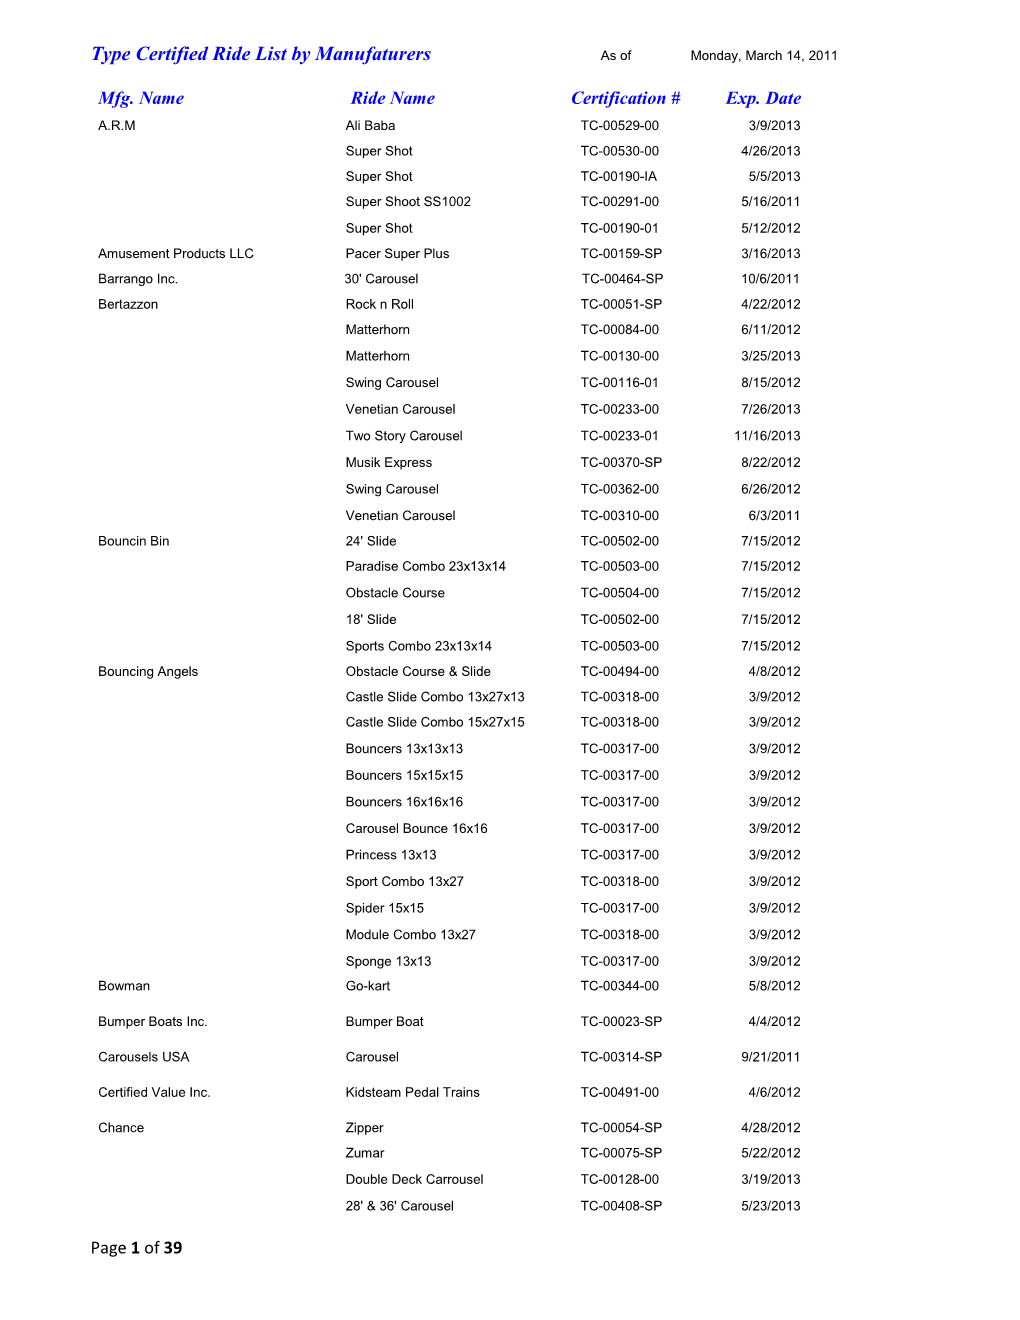 Type Certified Ride List by Manufaturers As of Monday, March 14, 2011